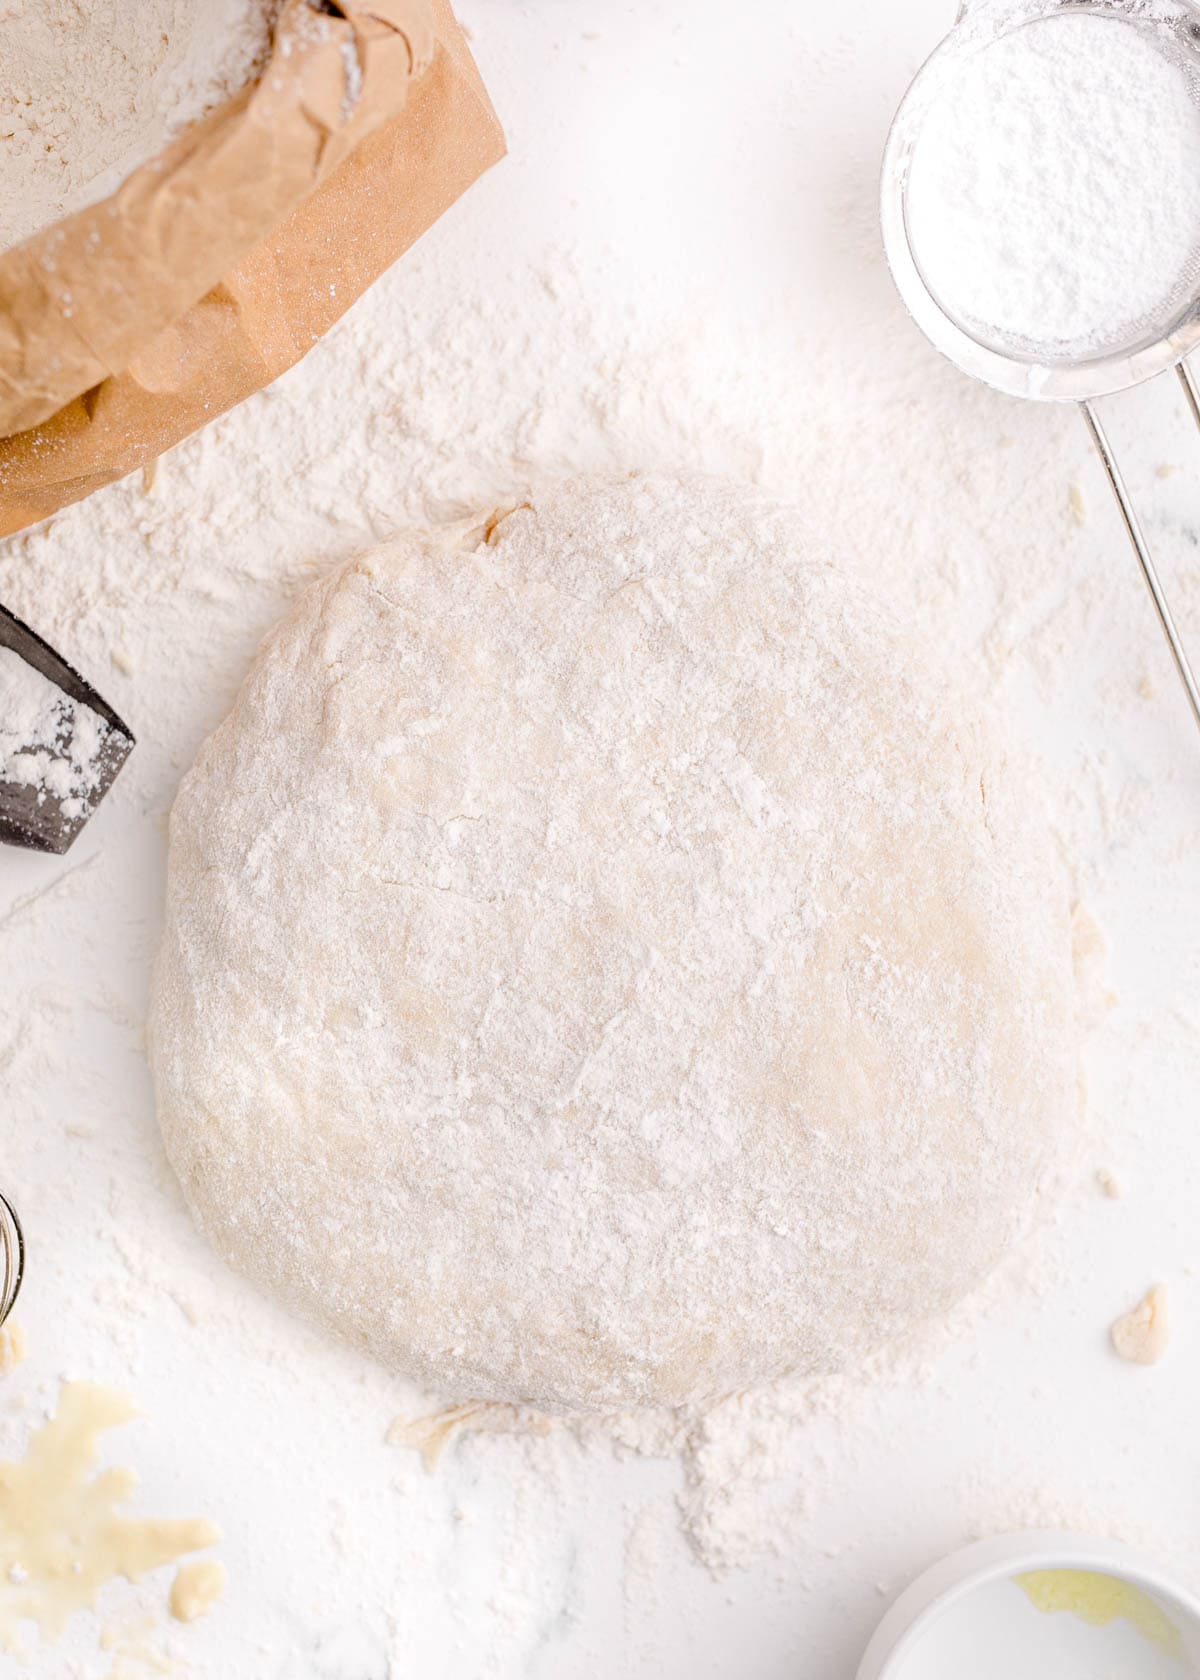 dough rolled out into a large circle on a floured work surface